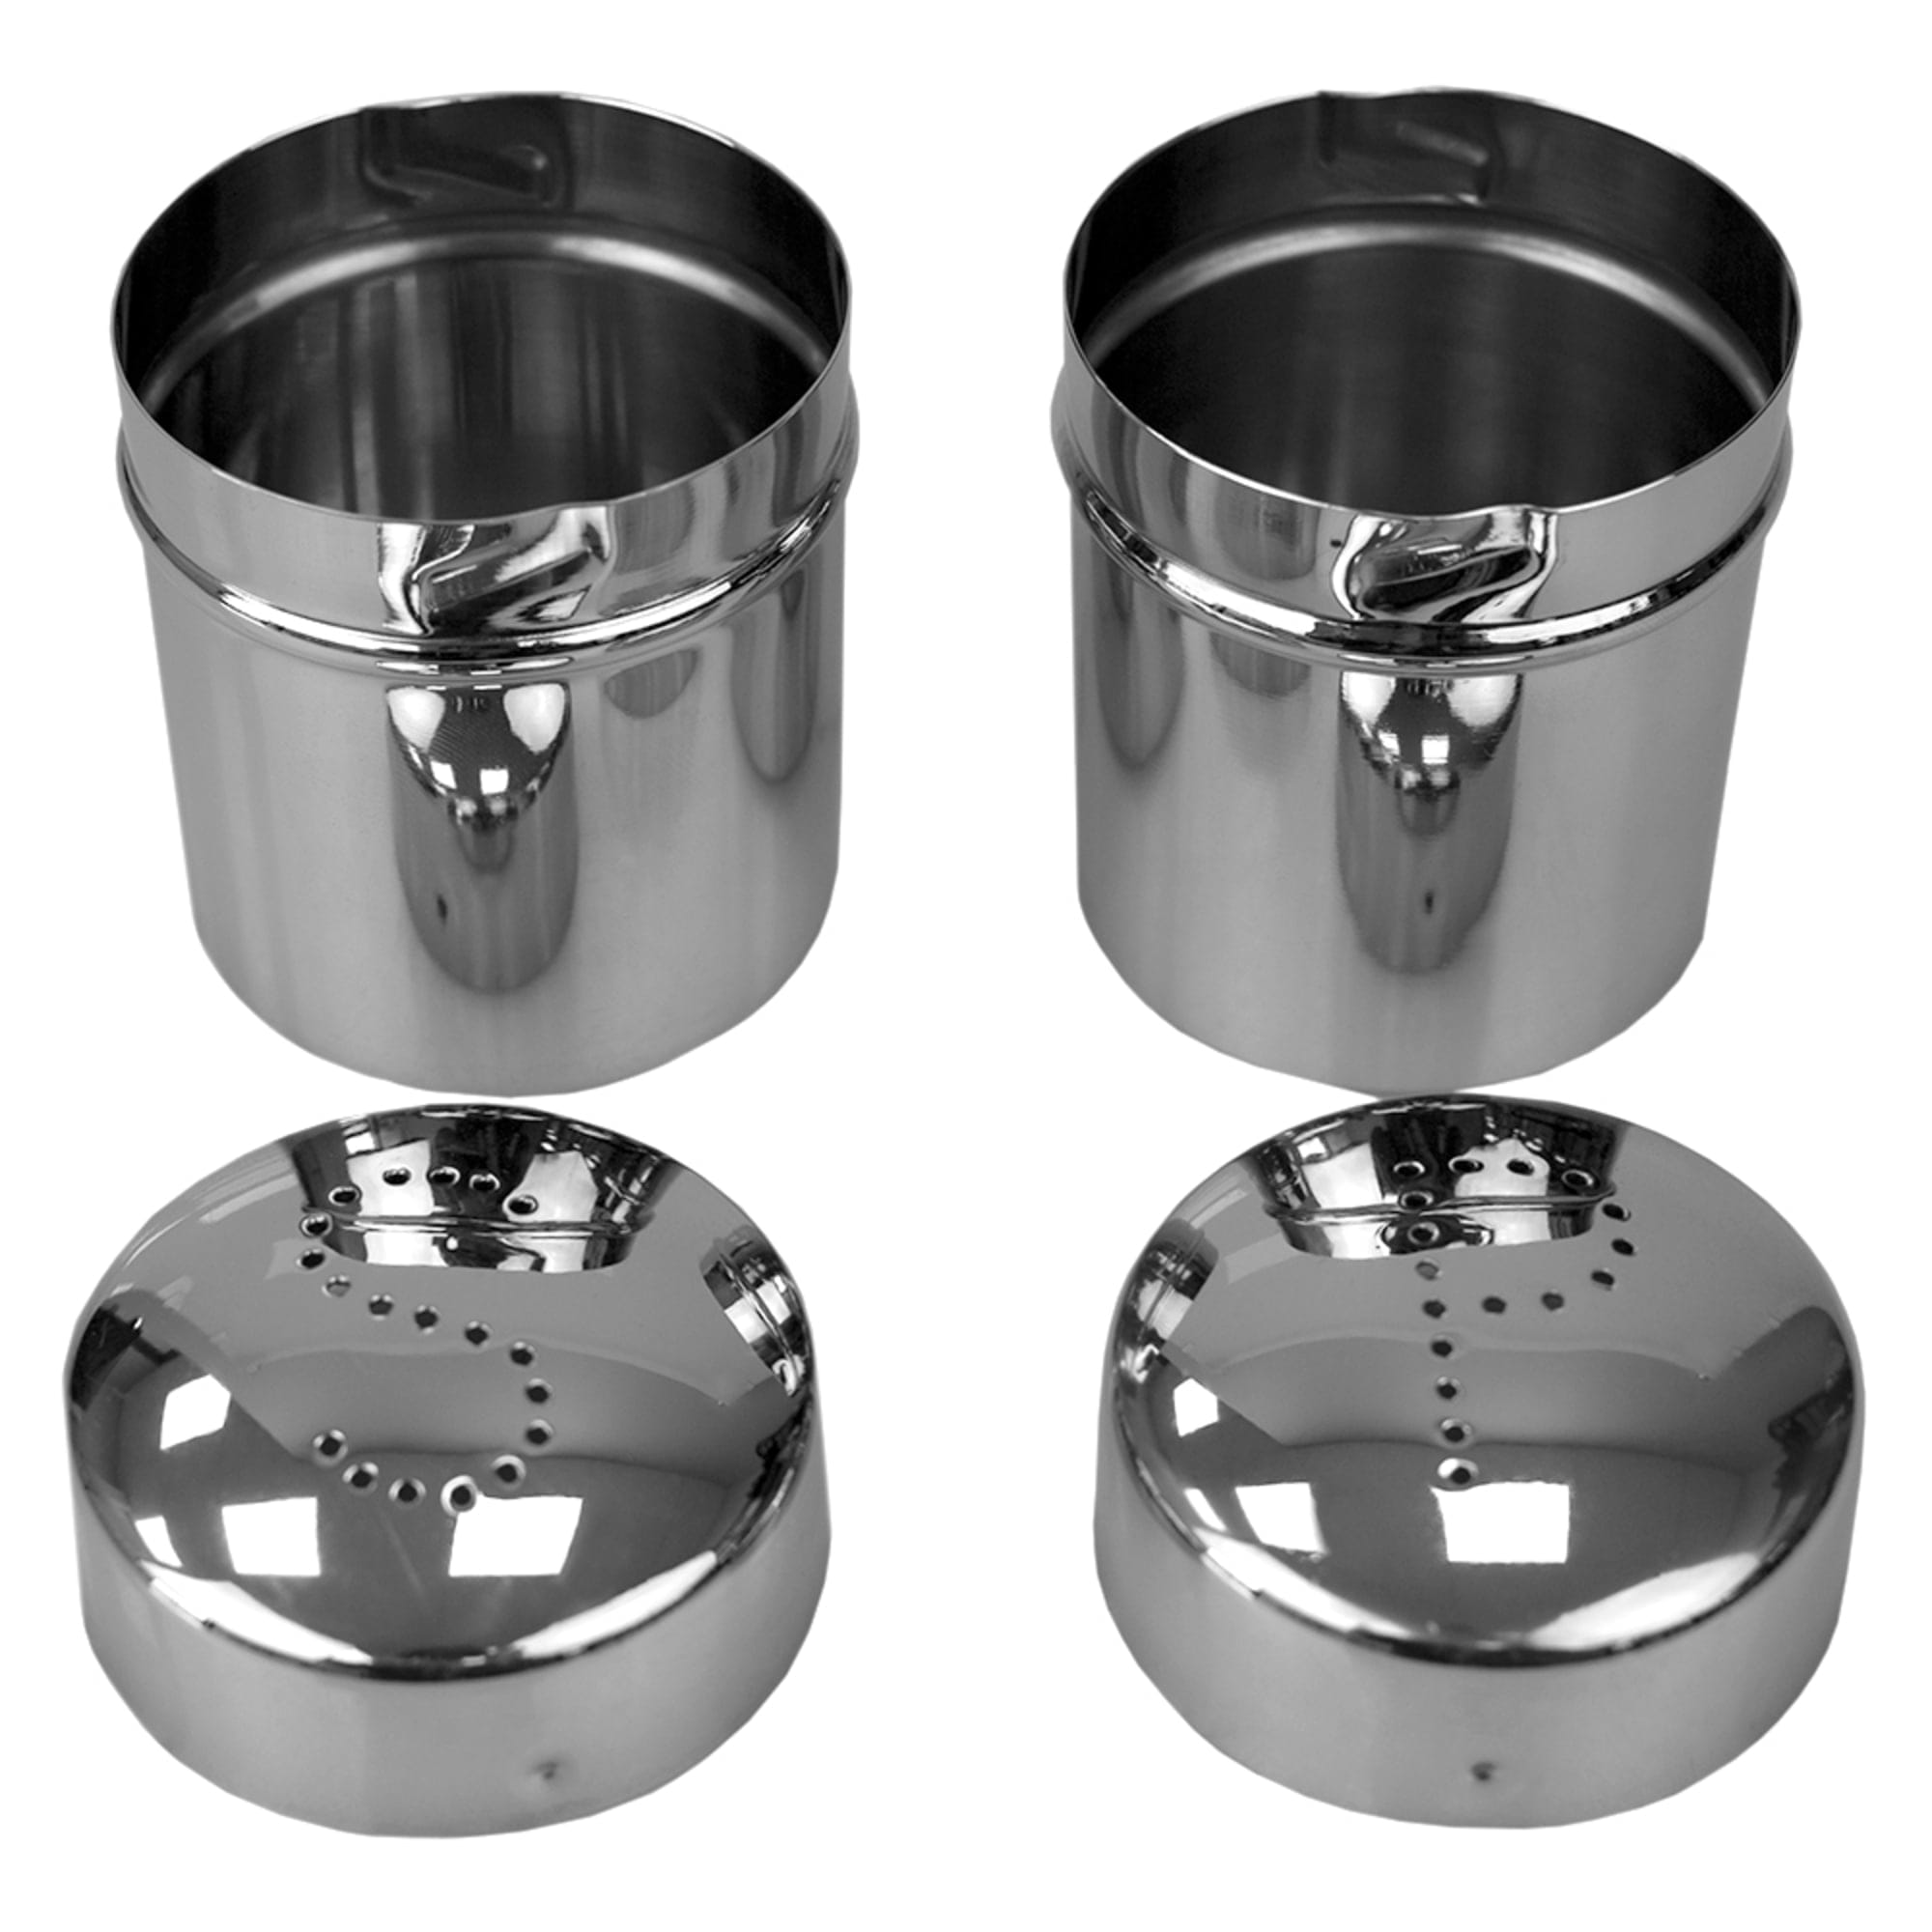 Home Basics 5 oz. Stainless Steel Salt and Pepper Set with Perforated Labeled Sifter Top, (Set of 2), Silver $3 EACH, CASE PACK OF 24